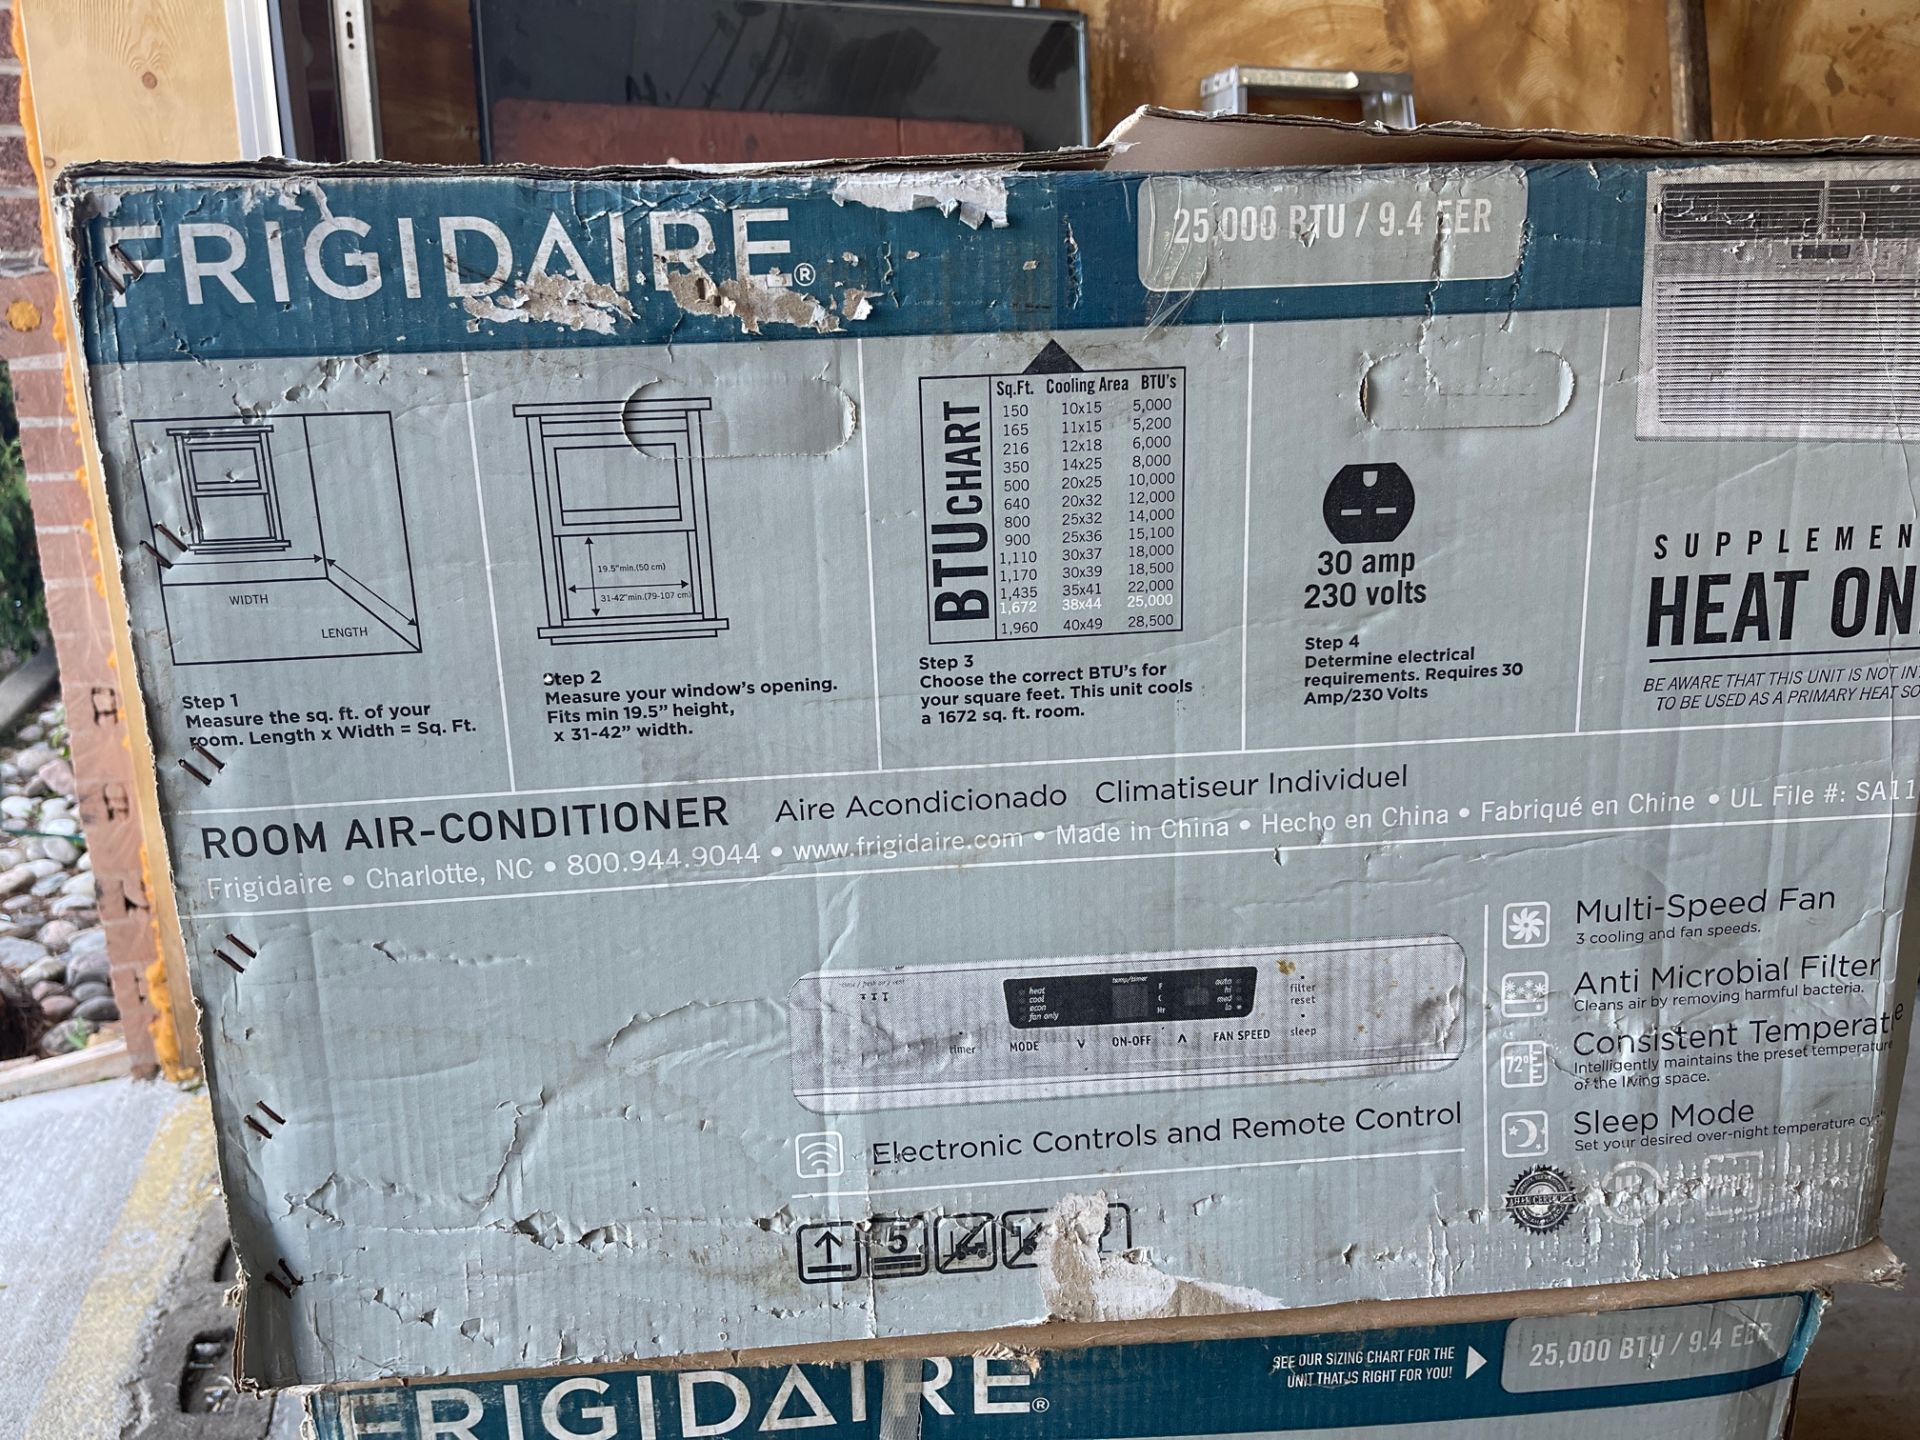 FRIGIDAIRE AIR CONDITIONER, MODEL R410 A, BRAND NEW IN THE BOX - Image 2 of 3